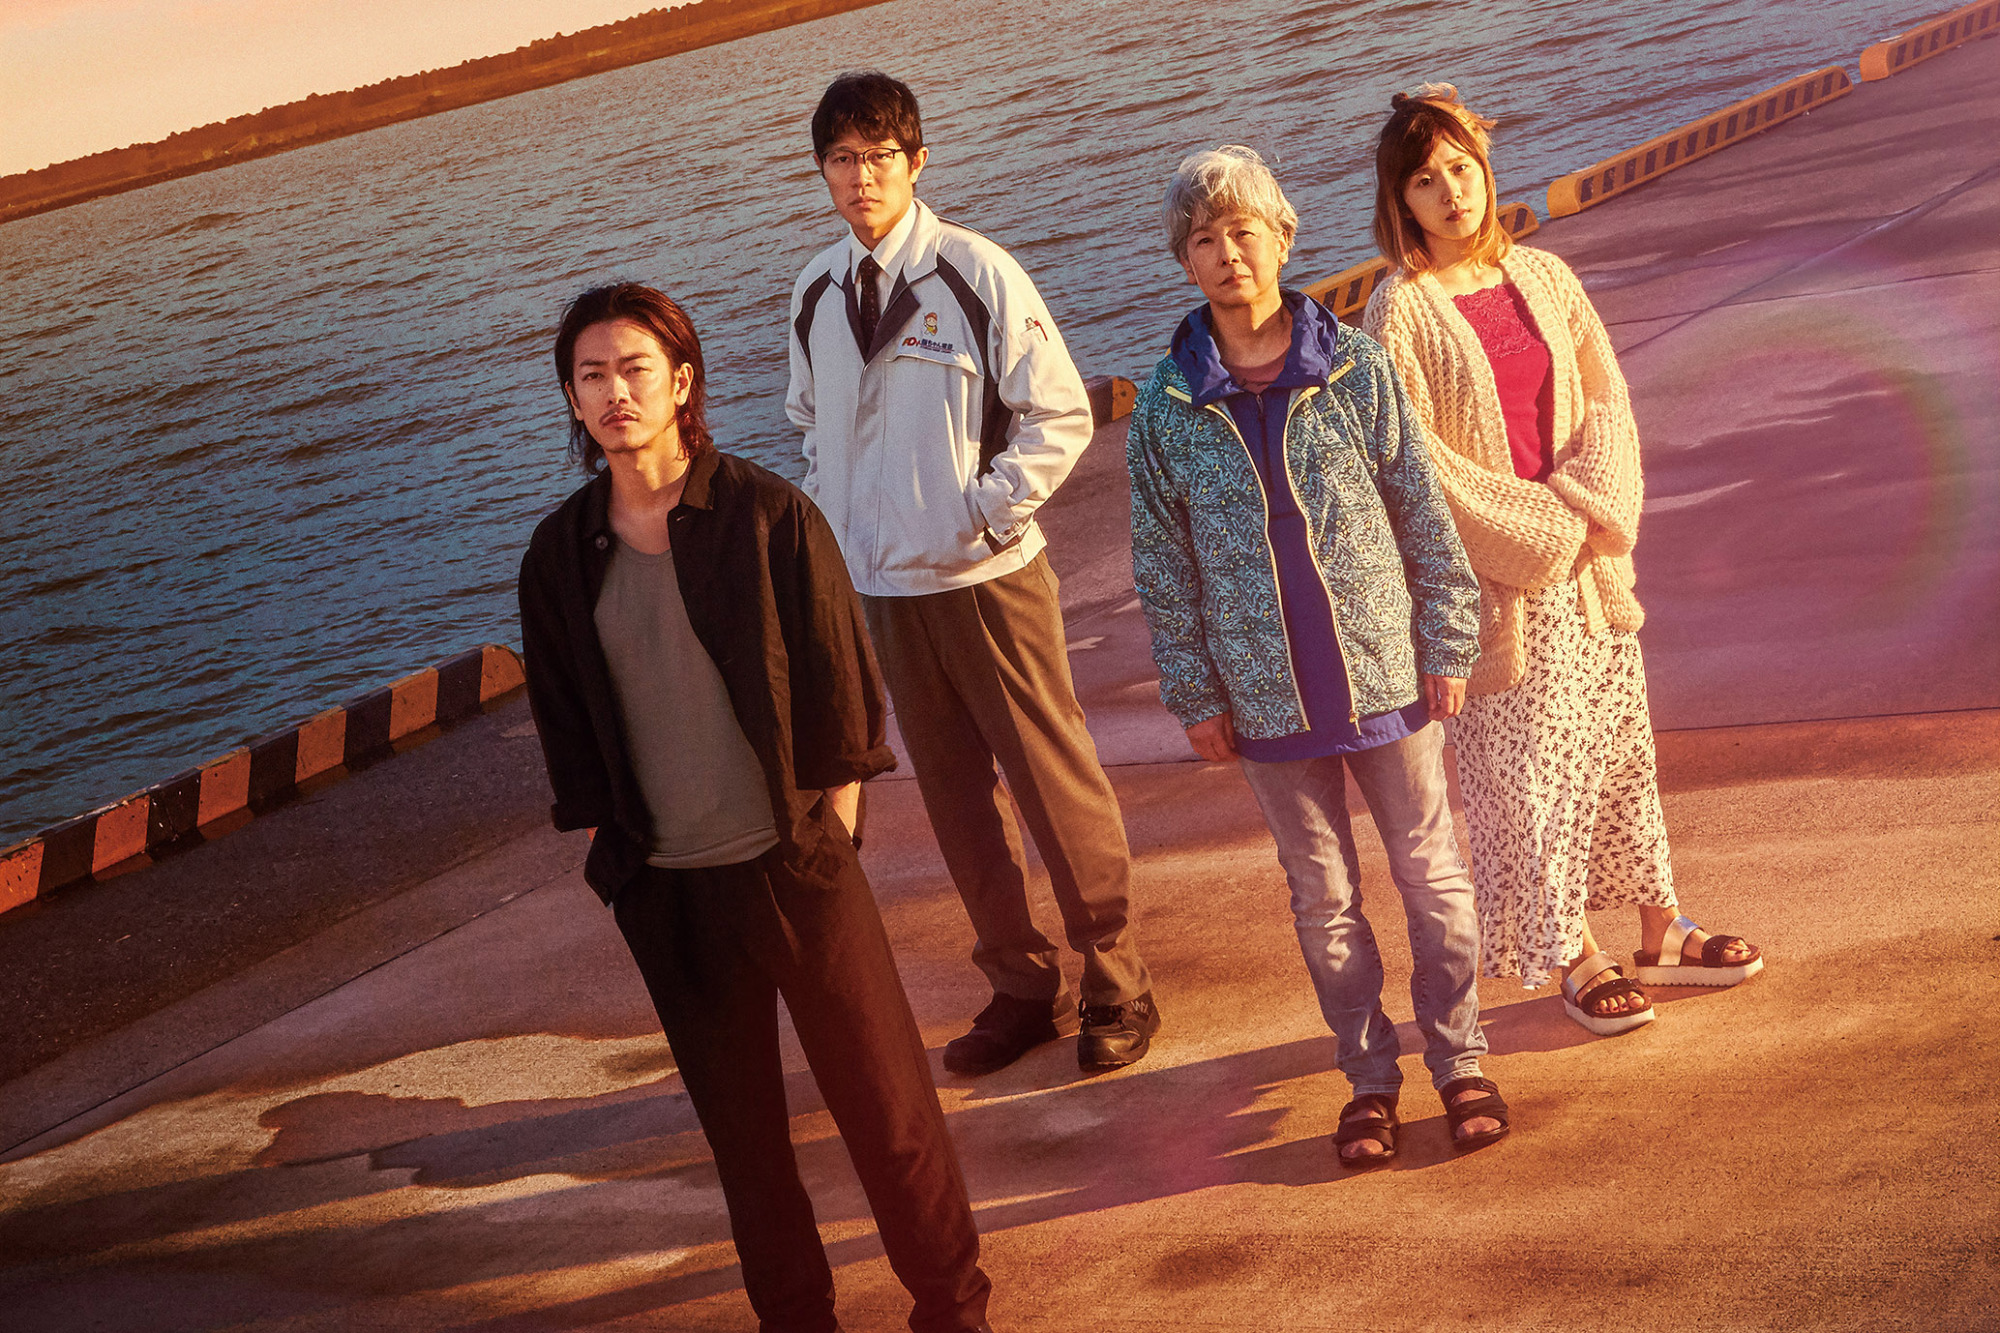 The ties that bind: Abusive parents, abandonment and uneasy family relations lie at the heart of Kazuya Shiraishi's latest film, 'One Night.' | &#169; 'ONE NIGHT' FILM PARTNERS